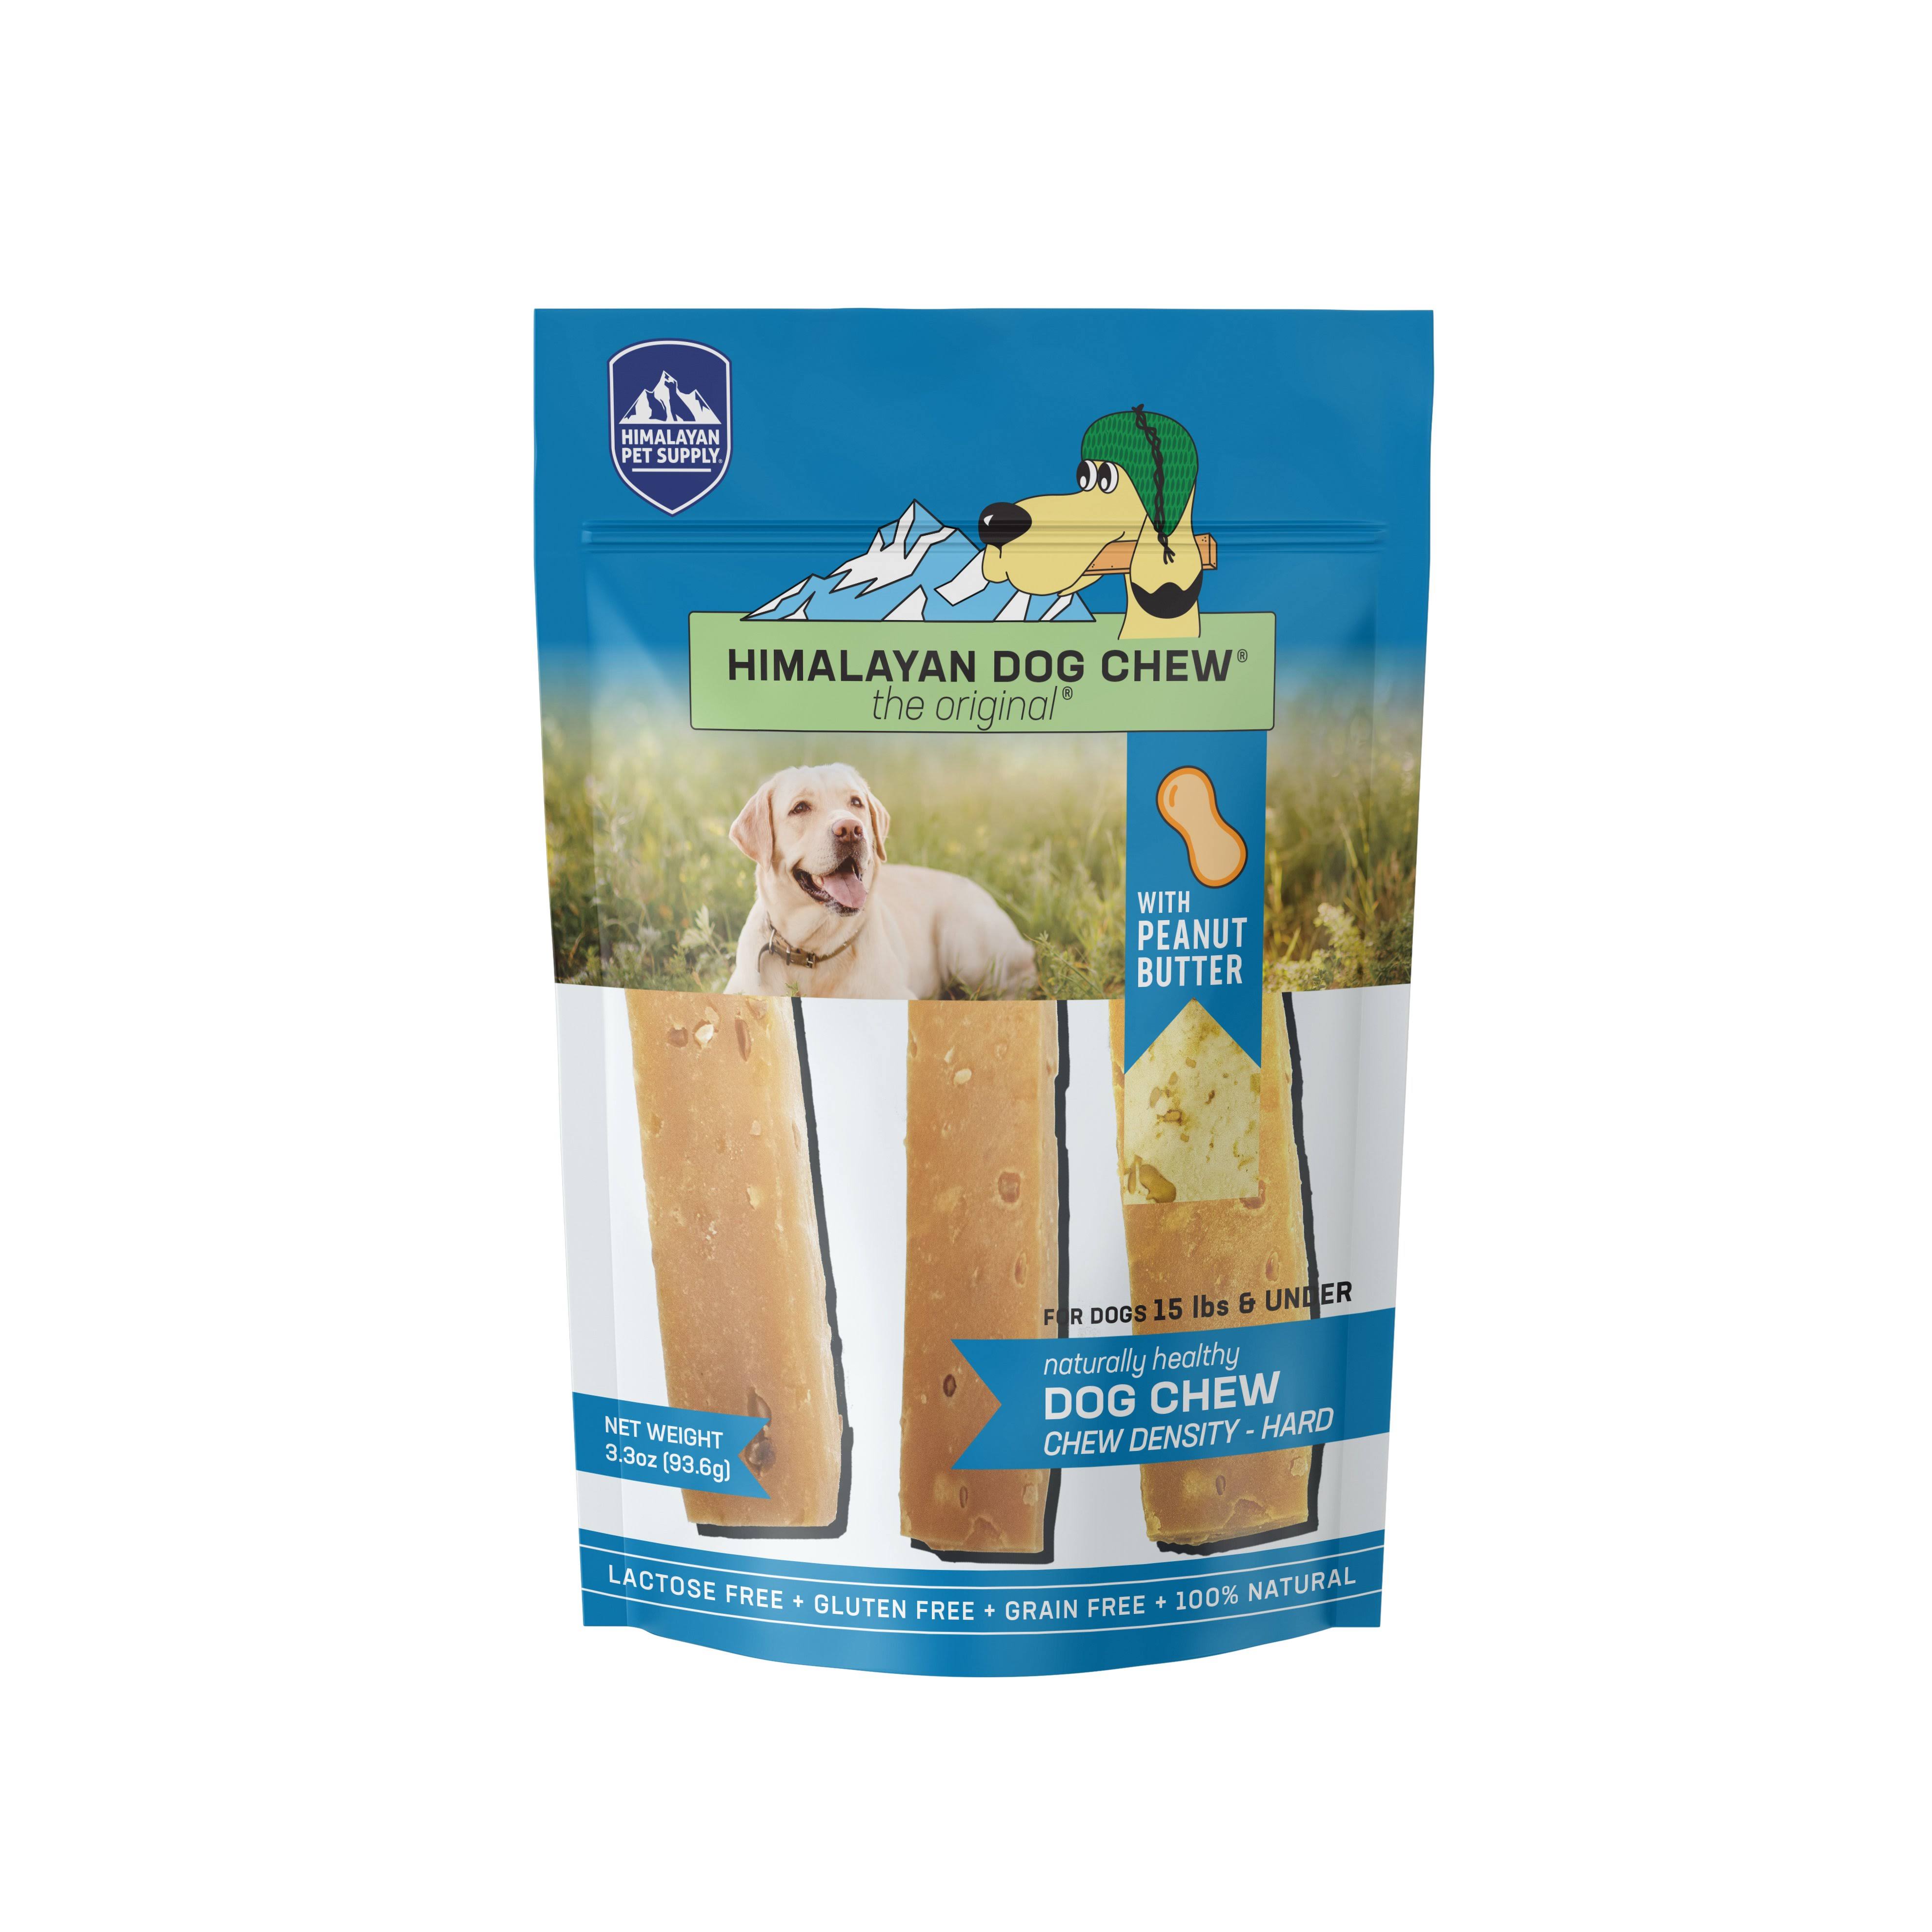 Himalayan Dog Chew, Peanut Butter Flavor, Small